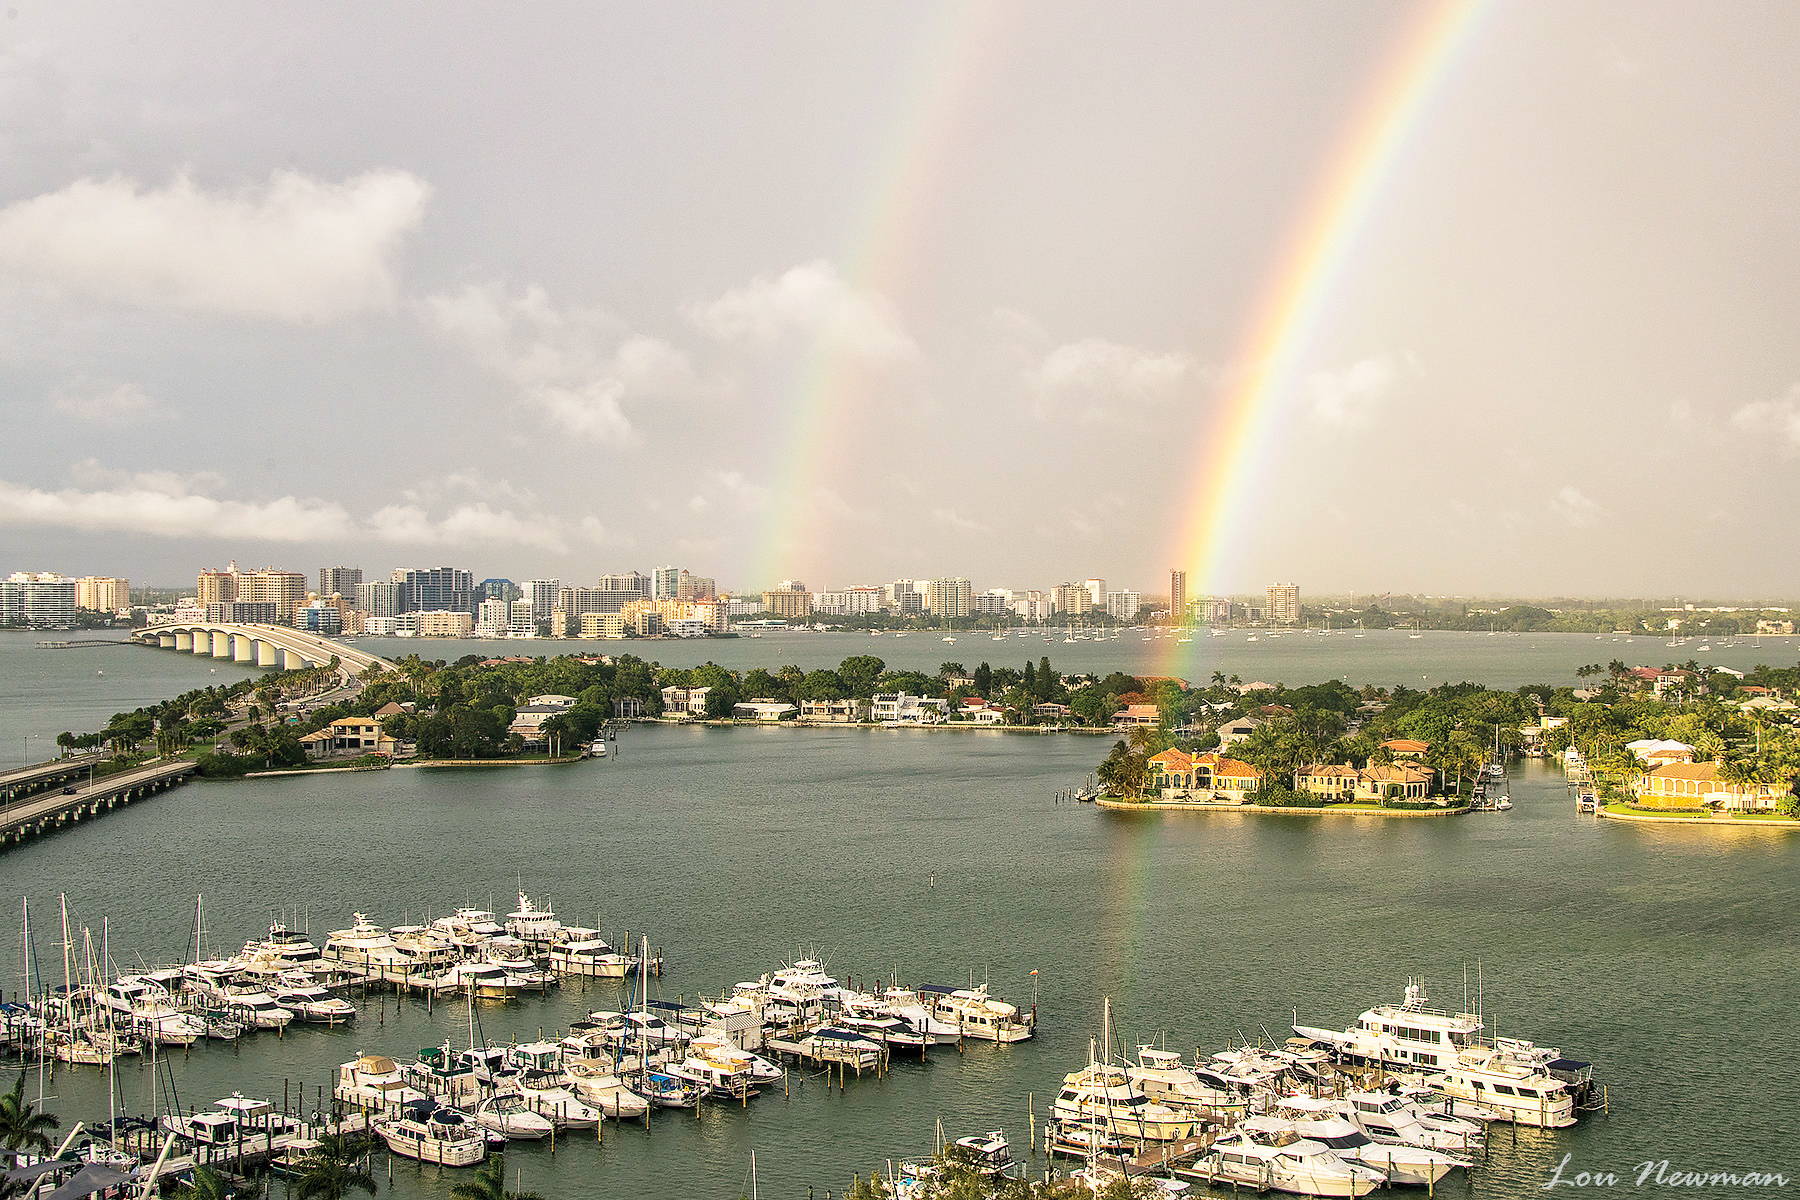 Lou Newman captured this photo of rainbows over Sarasota from the 19th floor of Plymouth Harbor on Sarasota Bay.